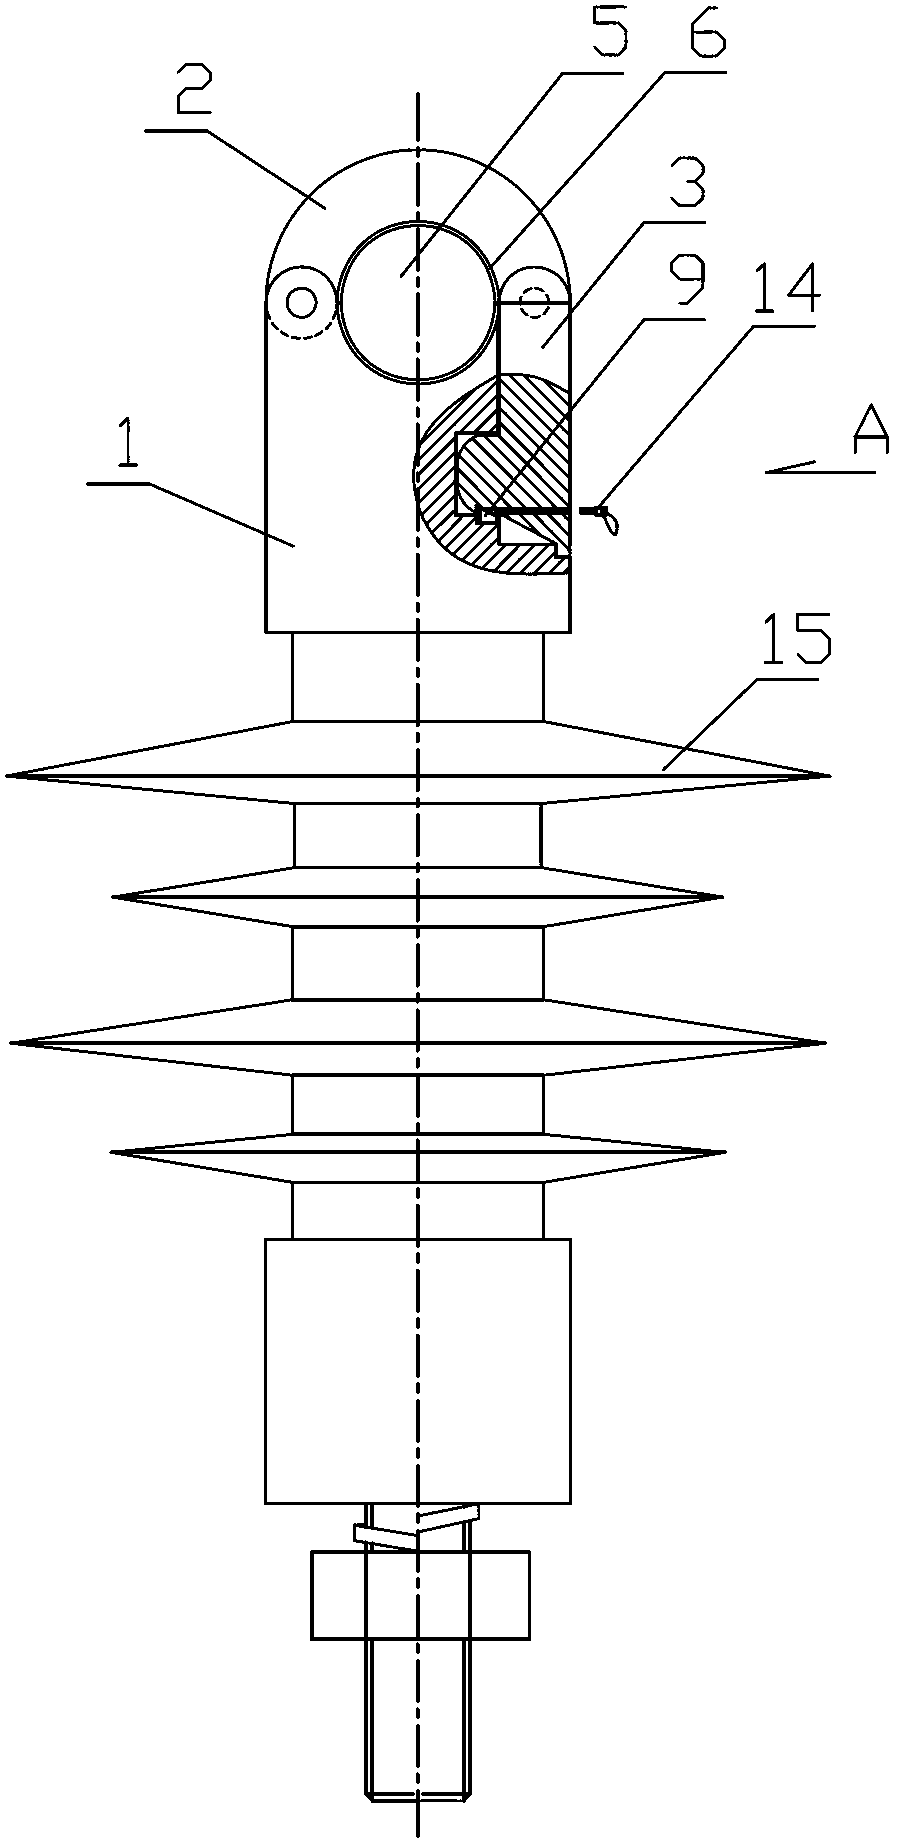 Quick support composite insulator hardware for insulated overhead line and operation method of quick support composite insulator hardware